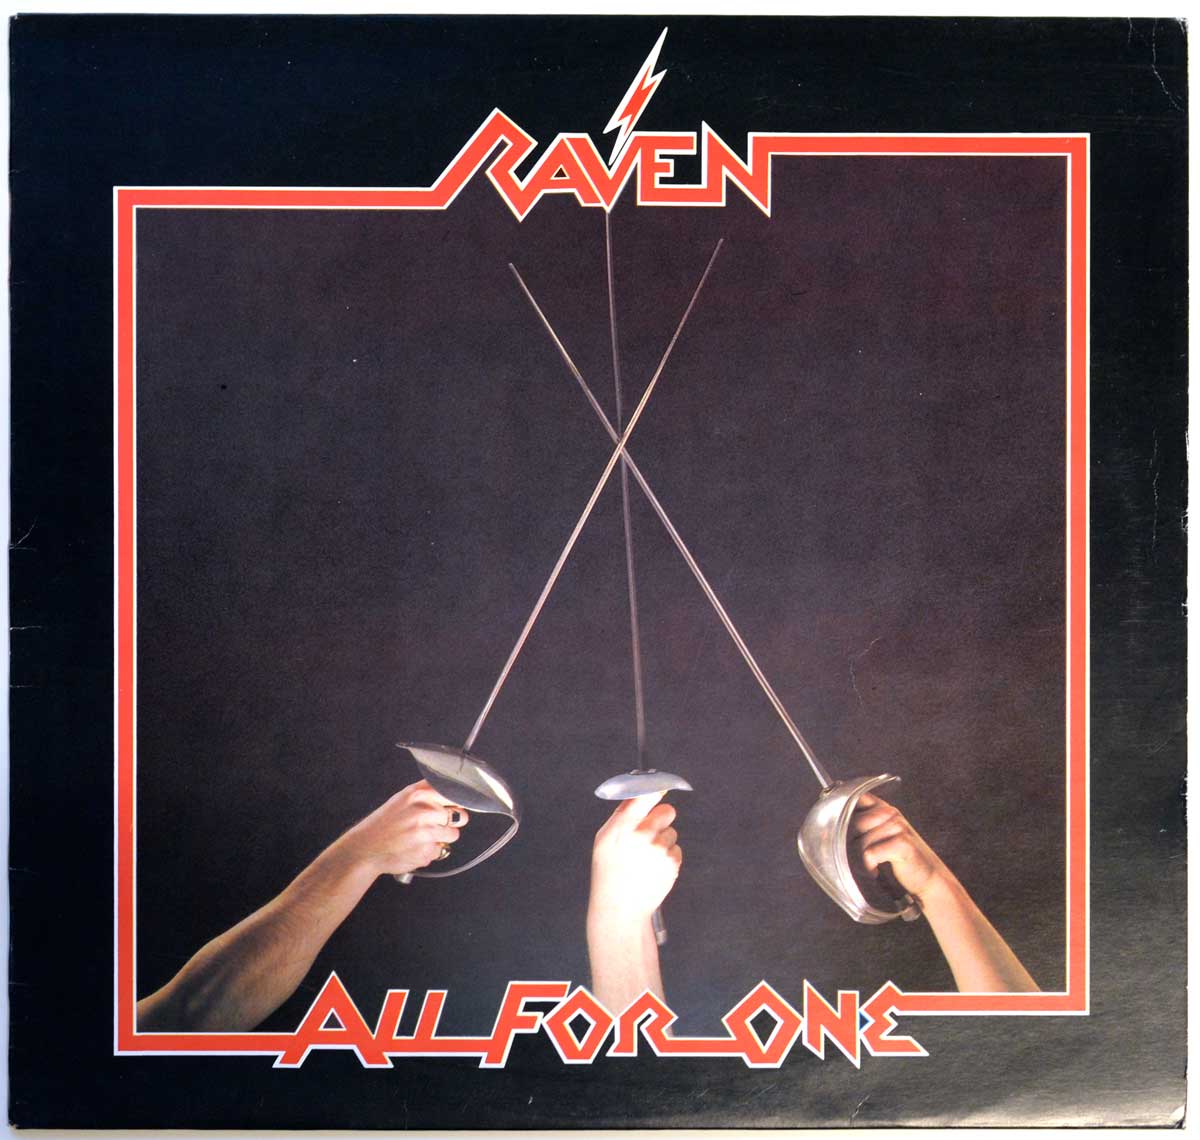 High Quality Photo of Album Front Cover  "RAVEN - All For One NWOBHM"